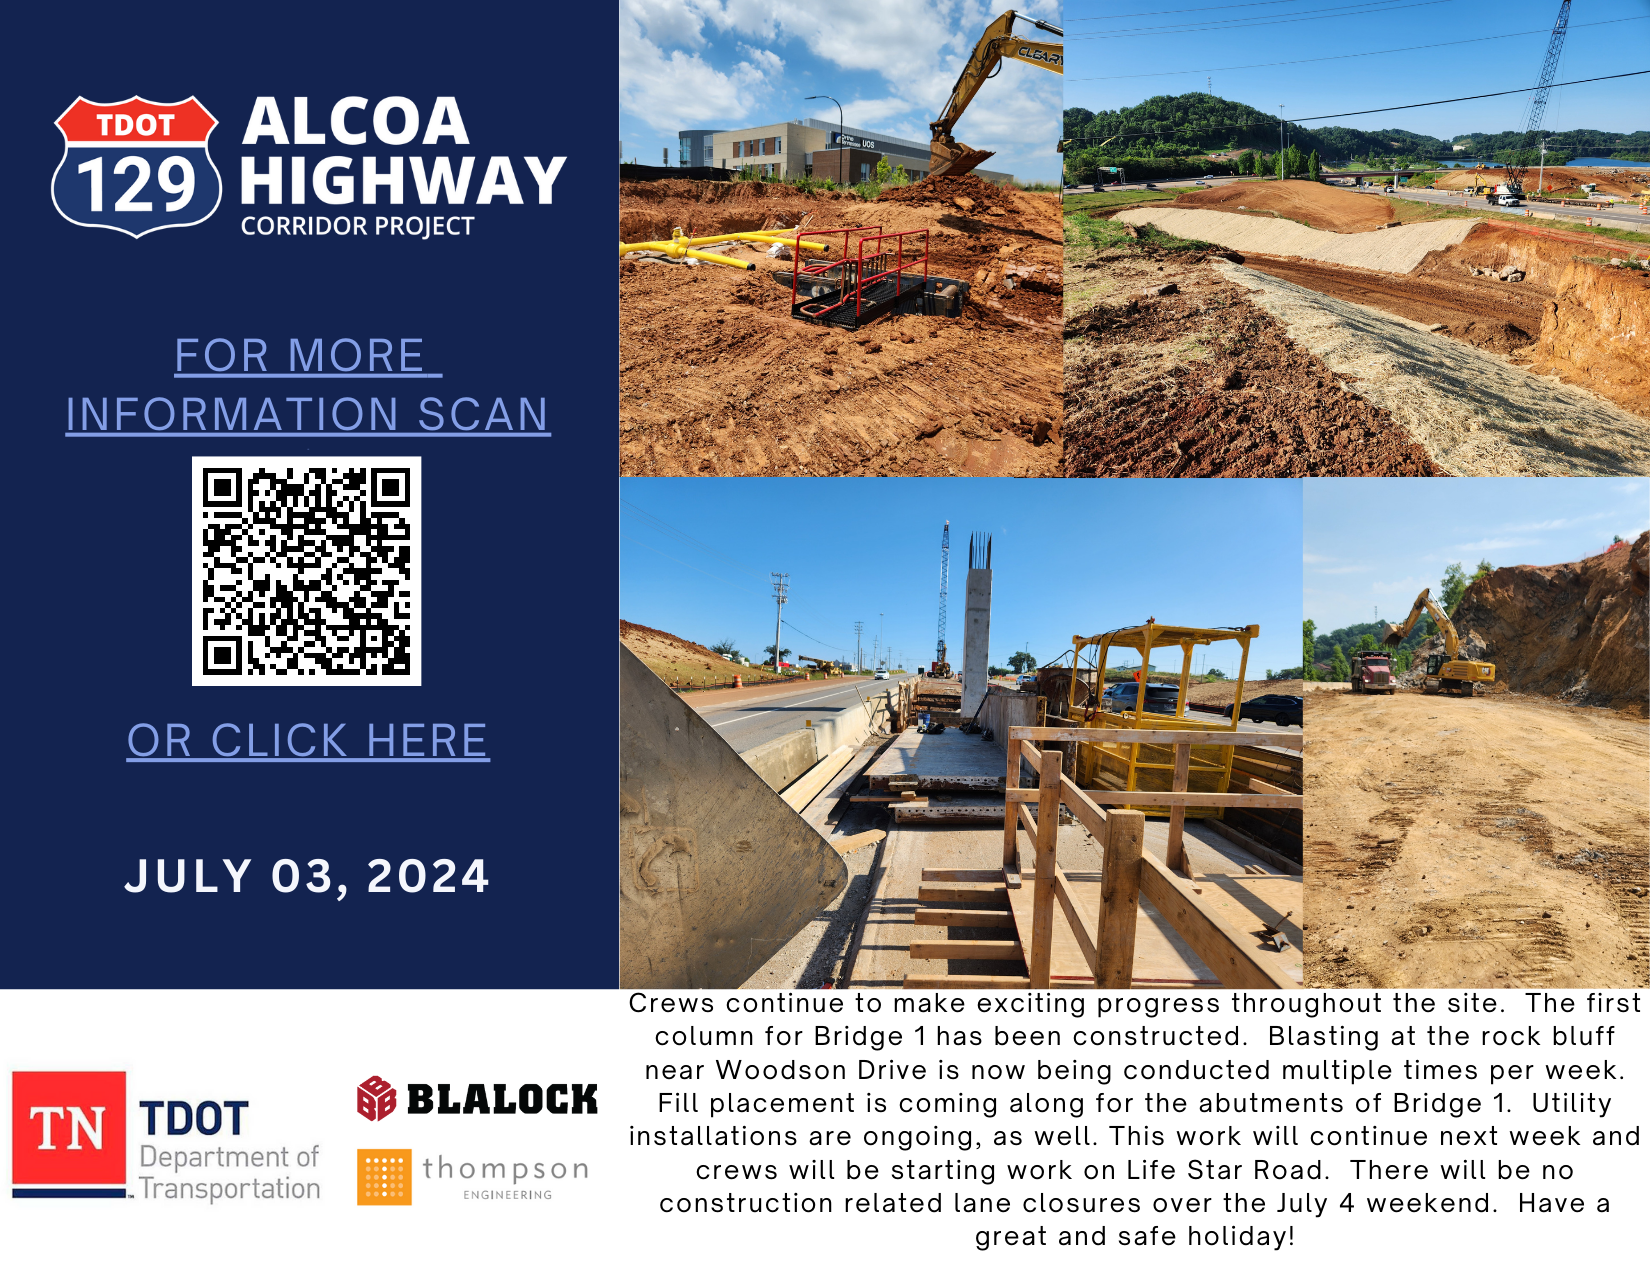 The Tennessee Department of Transportation with More Lane Closures on Alcoa Highway and Information on Project